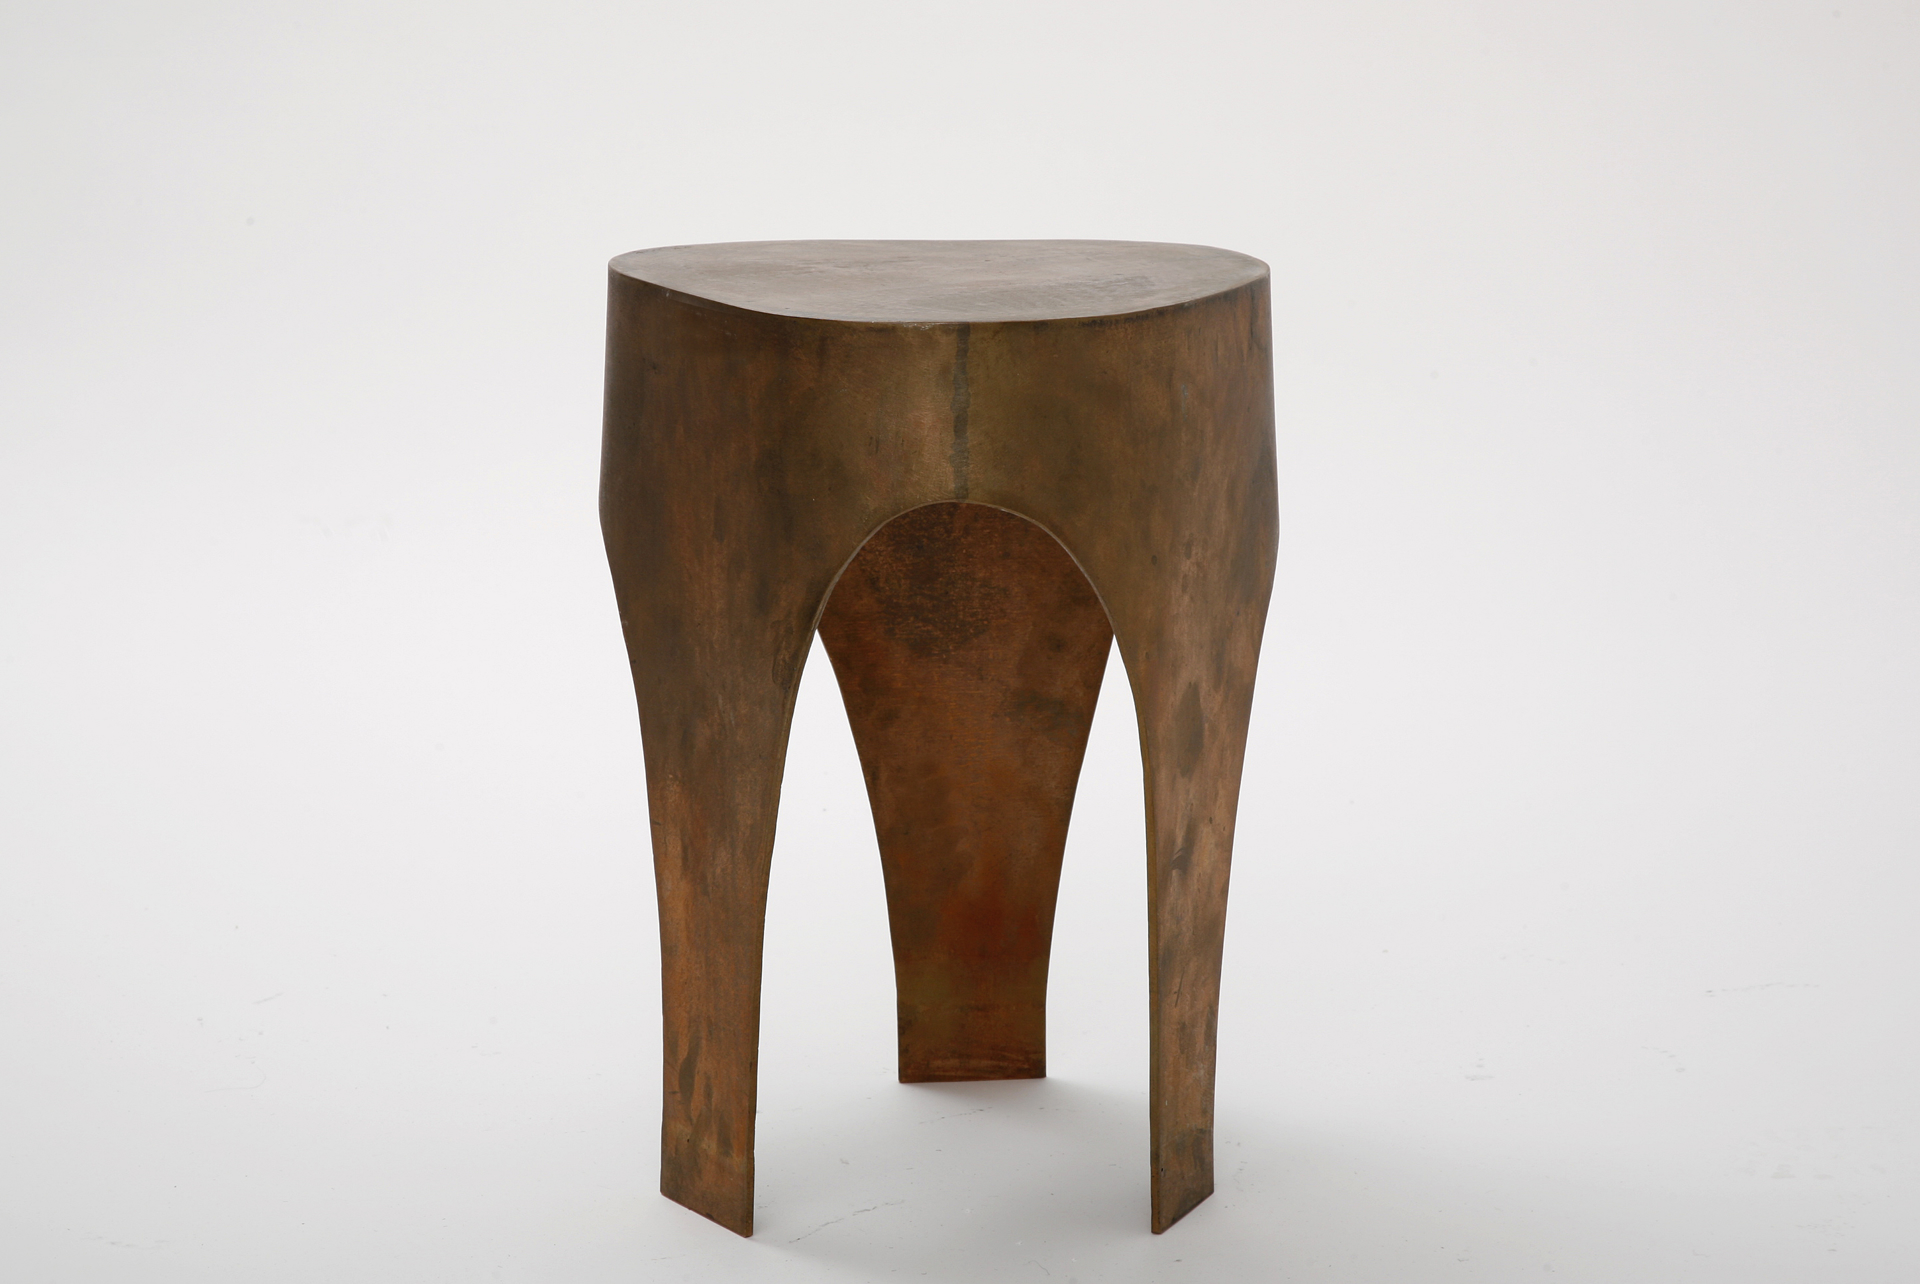 "Odalisque" Bronze stool by Jacques Jarrige